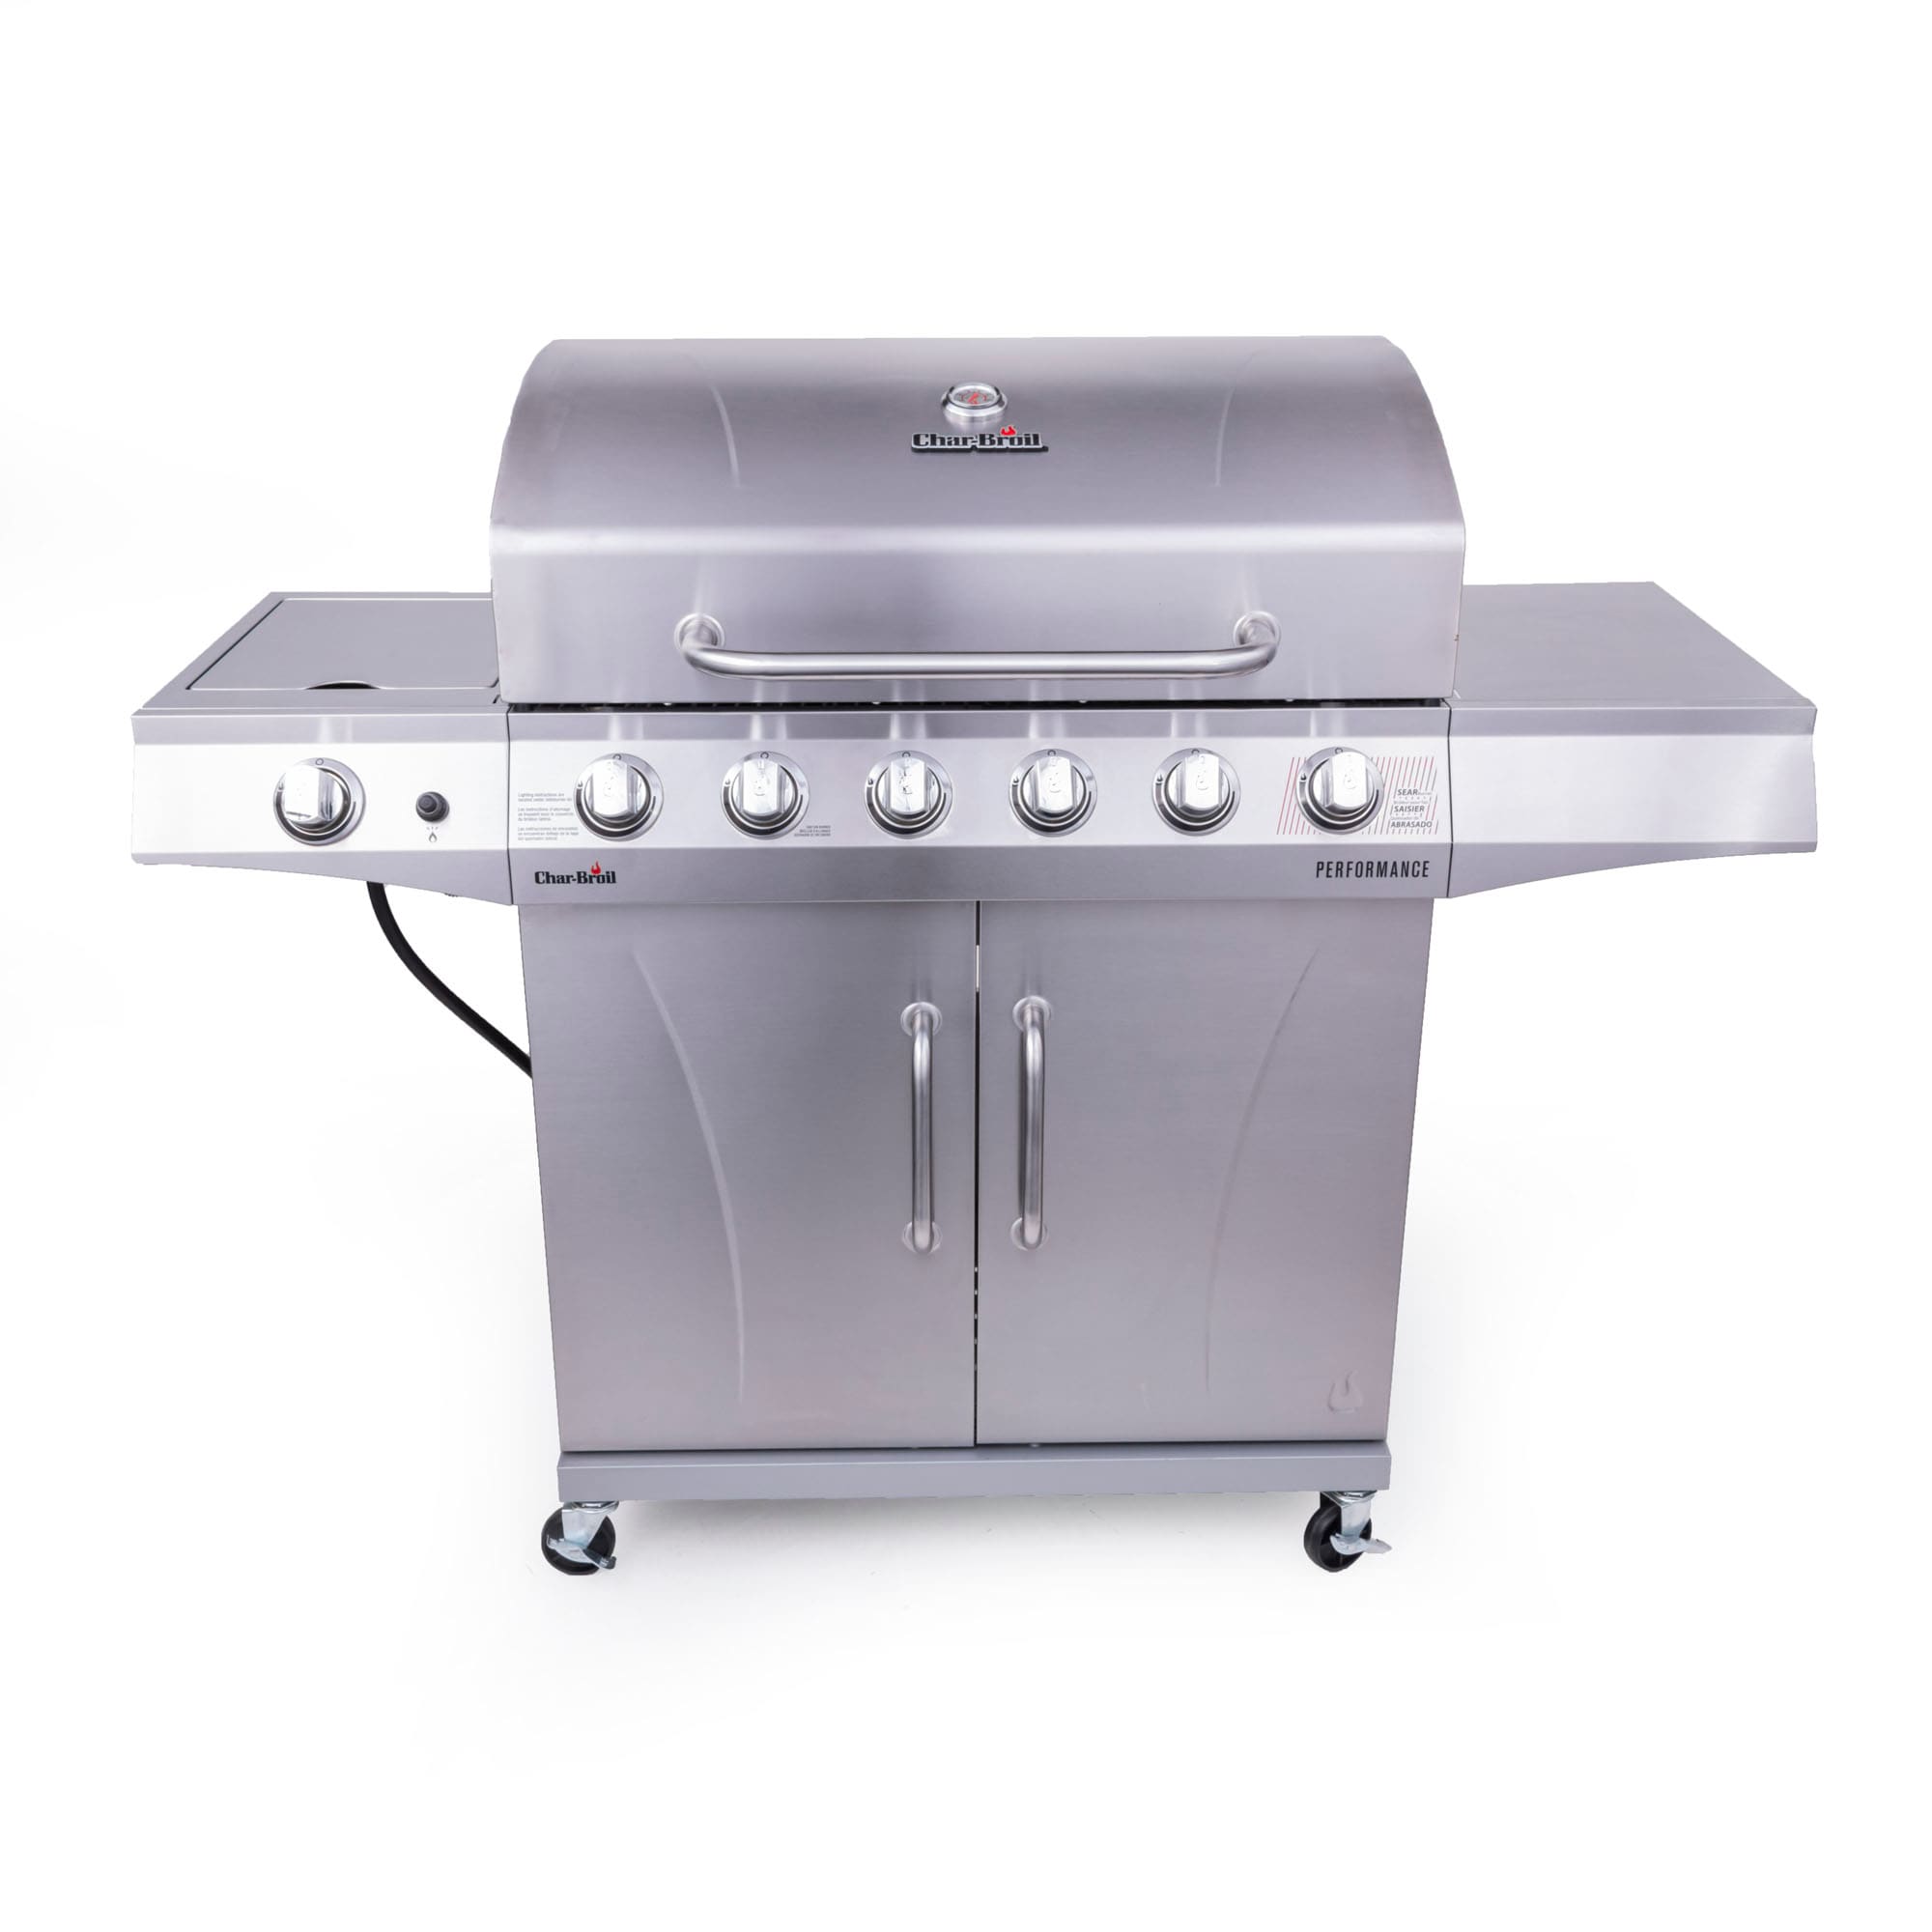 Char-Broil Performance Series Silver 6-Burner Liquid Propane Grill with 1 Side Burner in the Grills department at Lowes.com